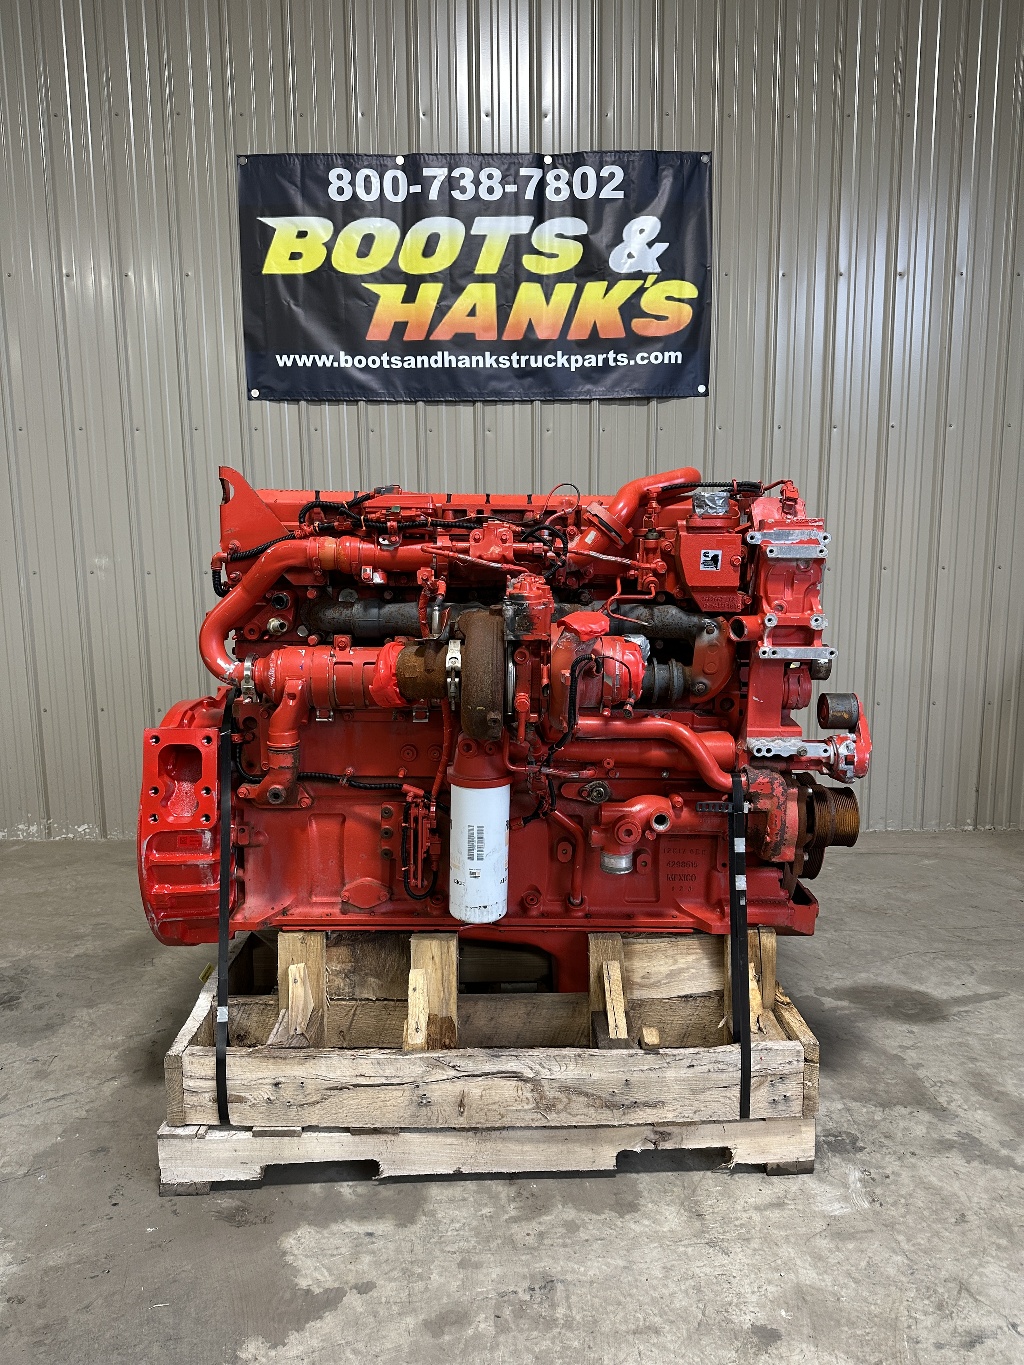 USED 2018 CUMMINS X15 COMPLETE ENGINE TRUCK PARTS #1964